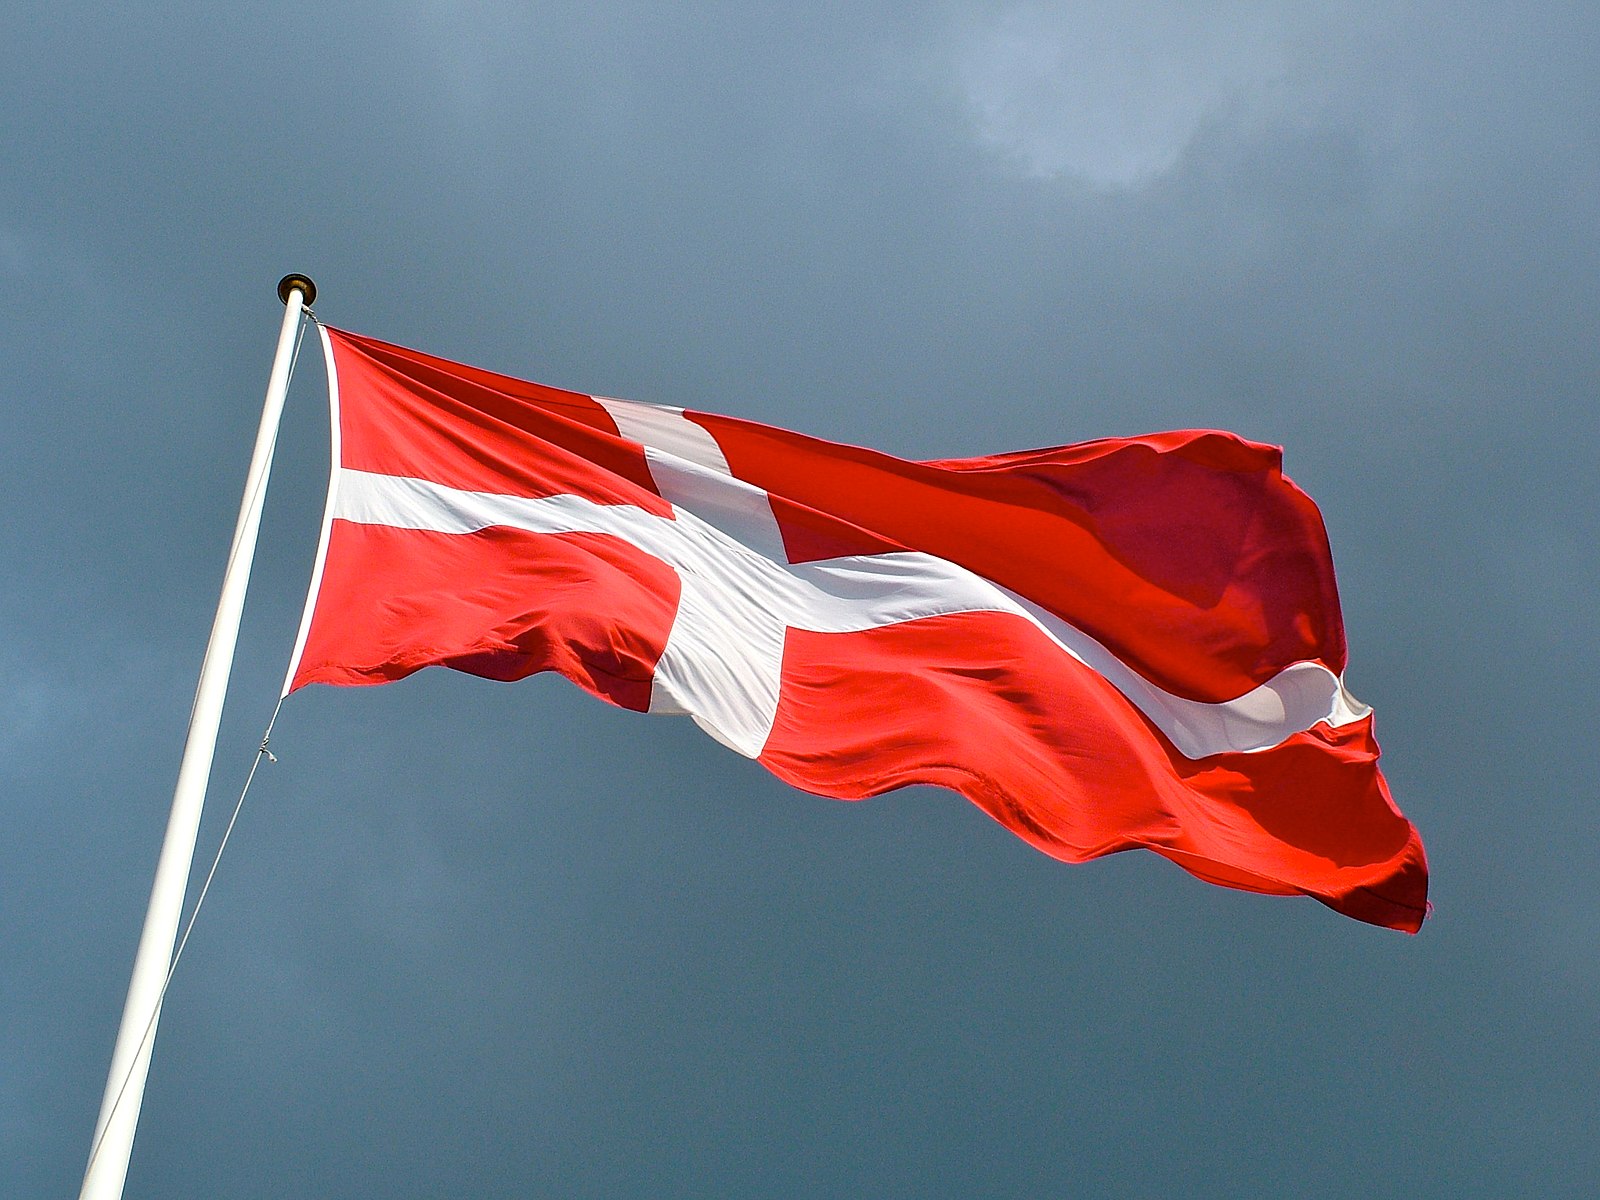 Denmark Apologizes for Abuses in Care Homes